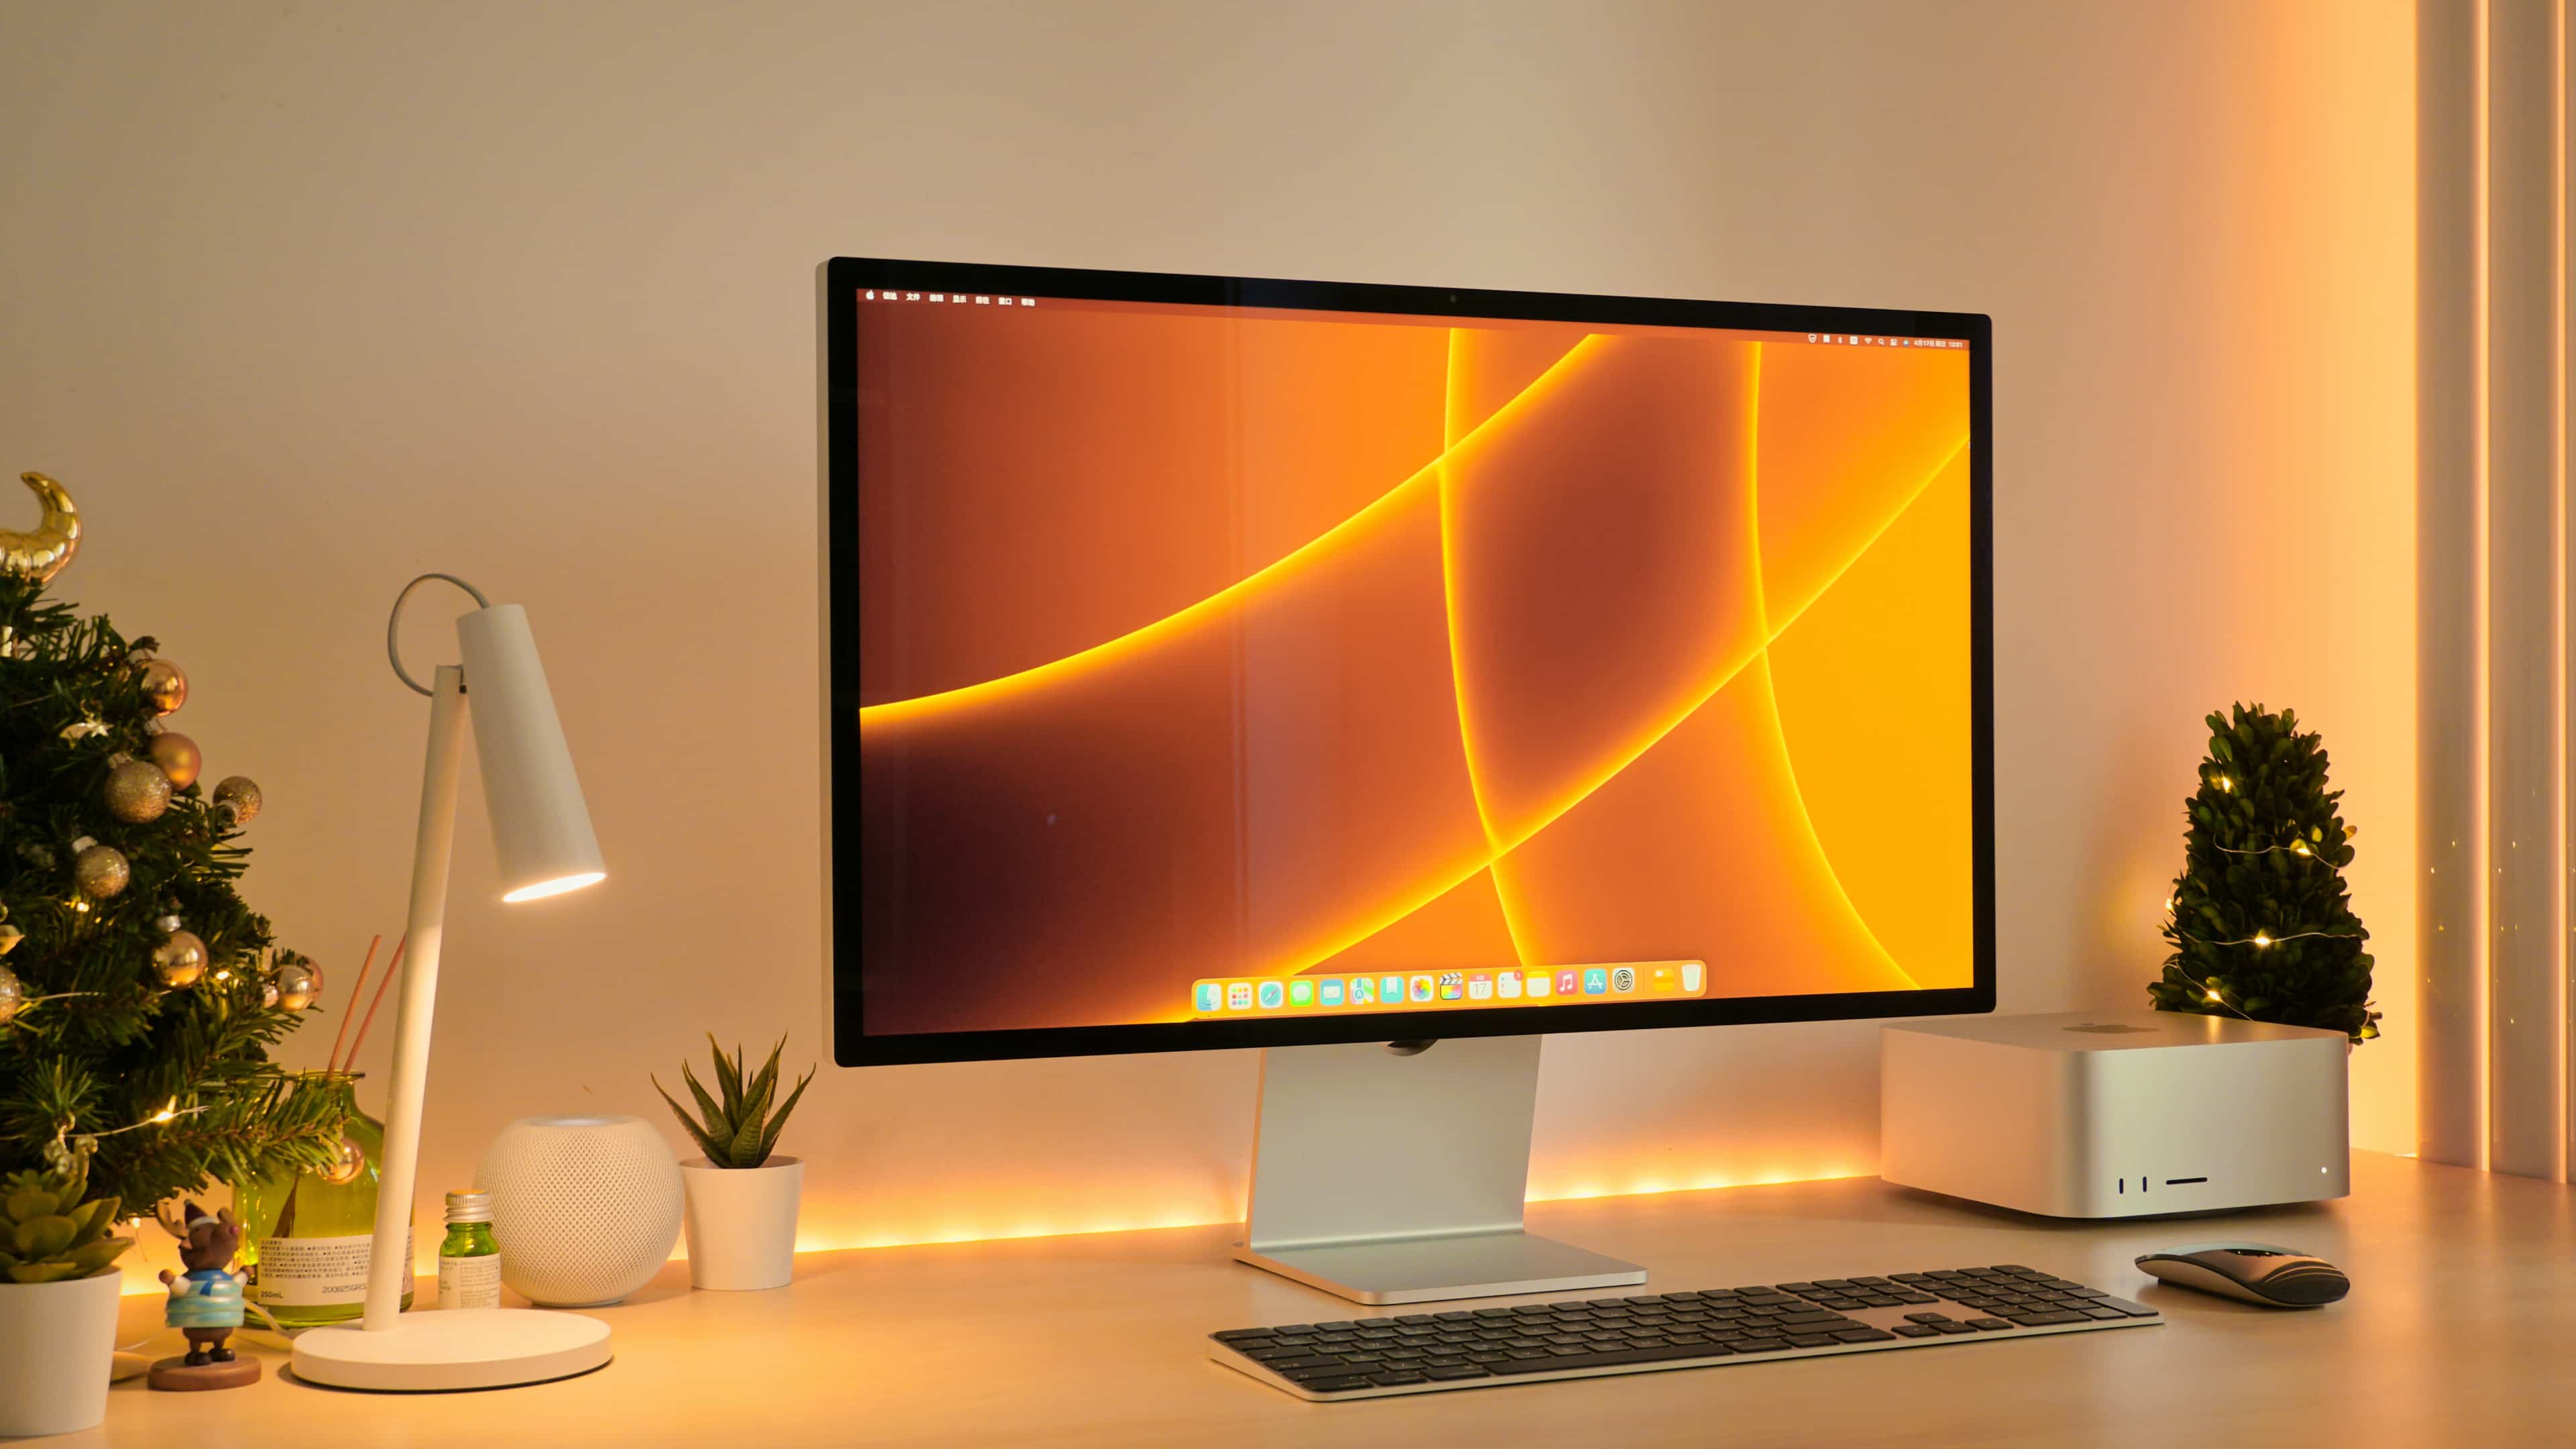 Apple's Studio Display and Mac Studio are featured sitting on a work desk in this lifestyle photograph